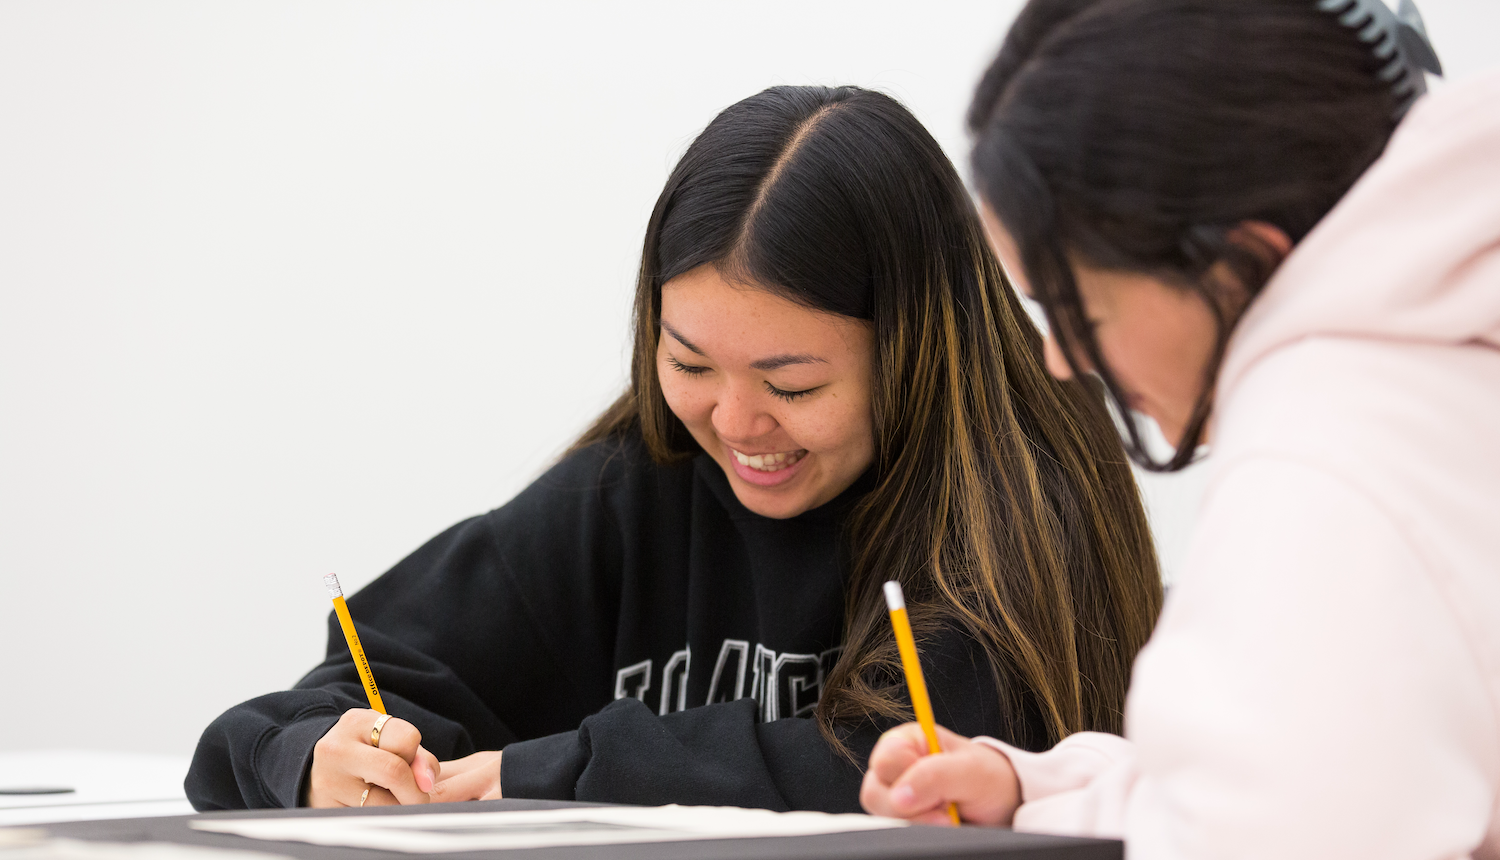 Two students writing and smiling in class